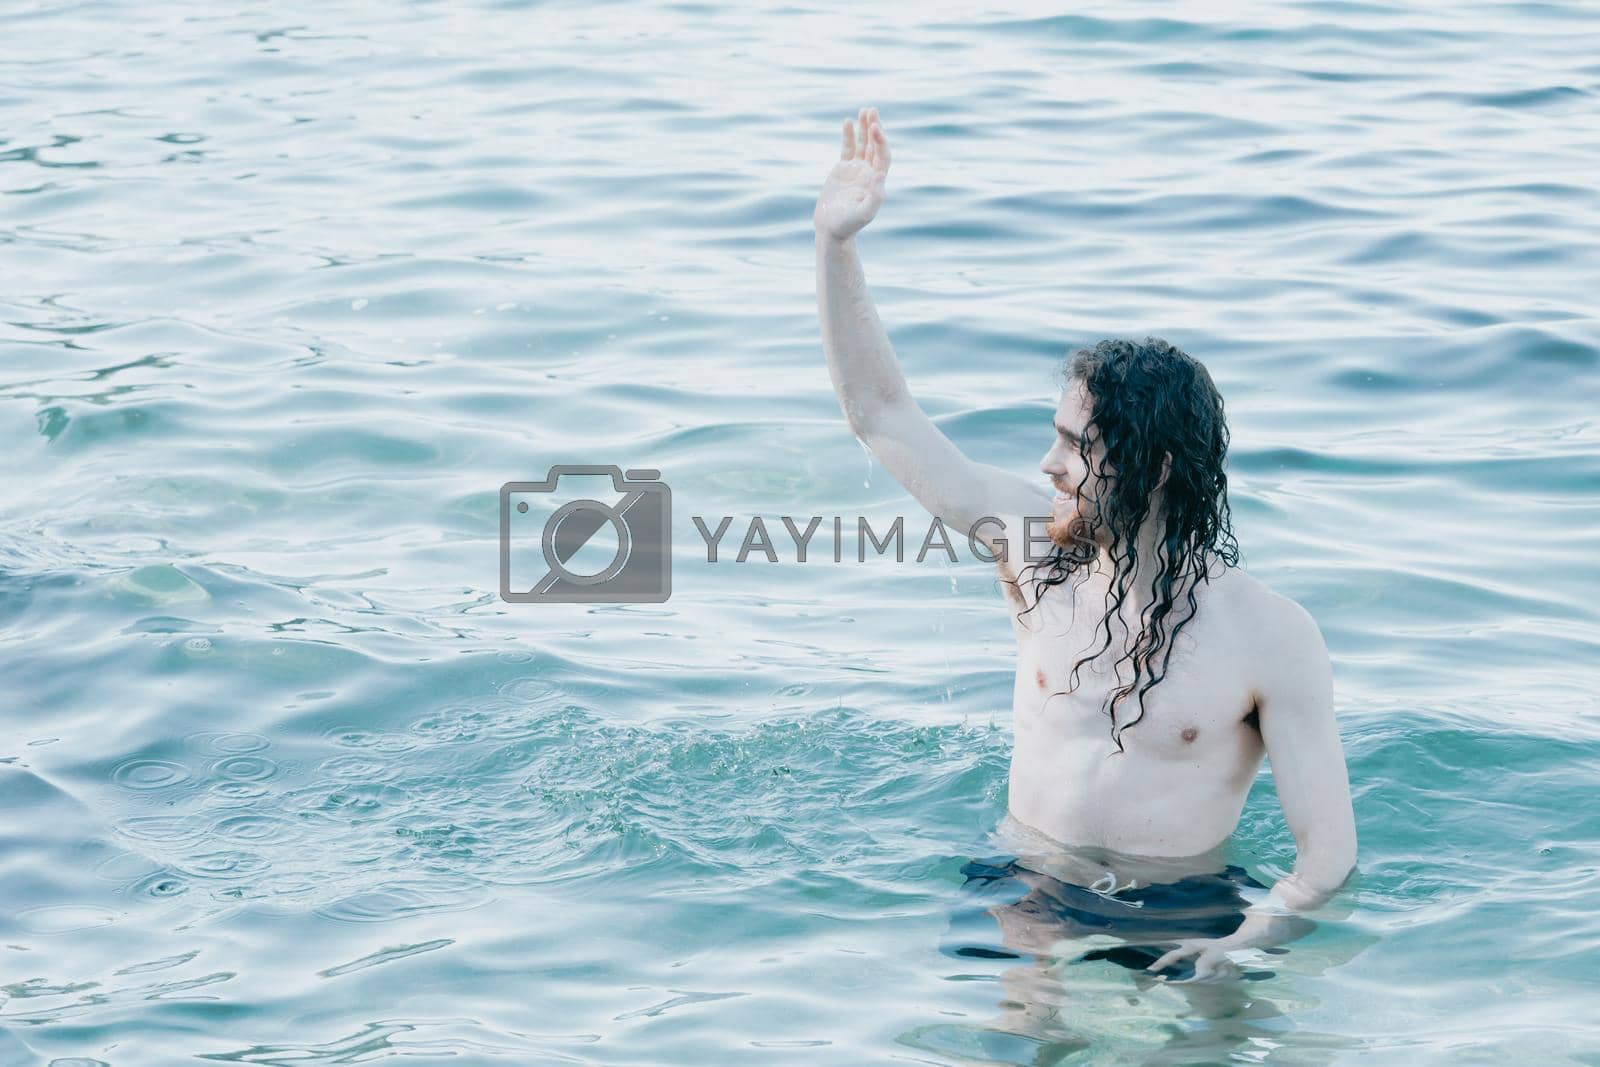 Royalty free image of Long hair man inside crystal clear water saluting someone in the beach, crystal clear water, holiday concept by AveCalvar